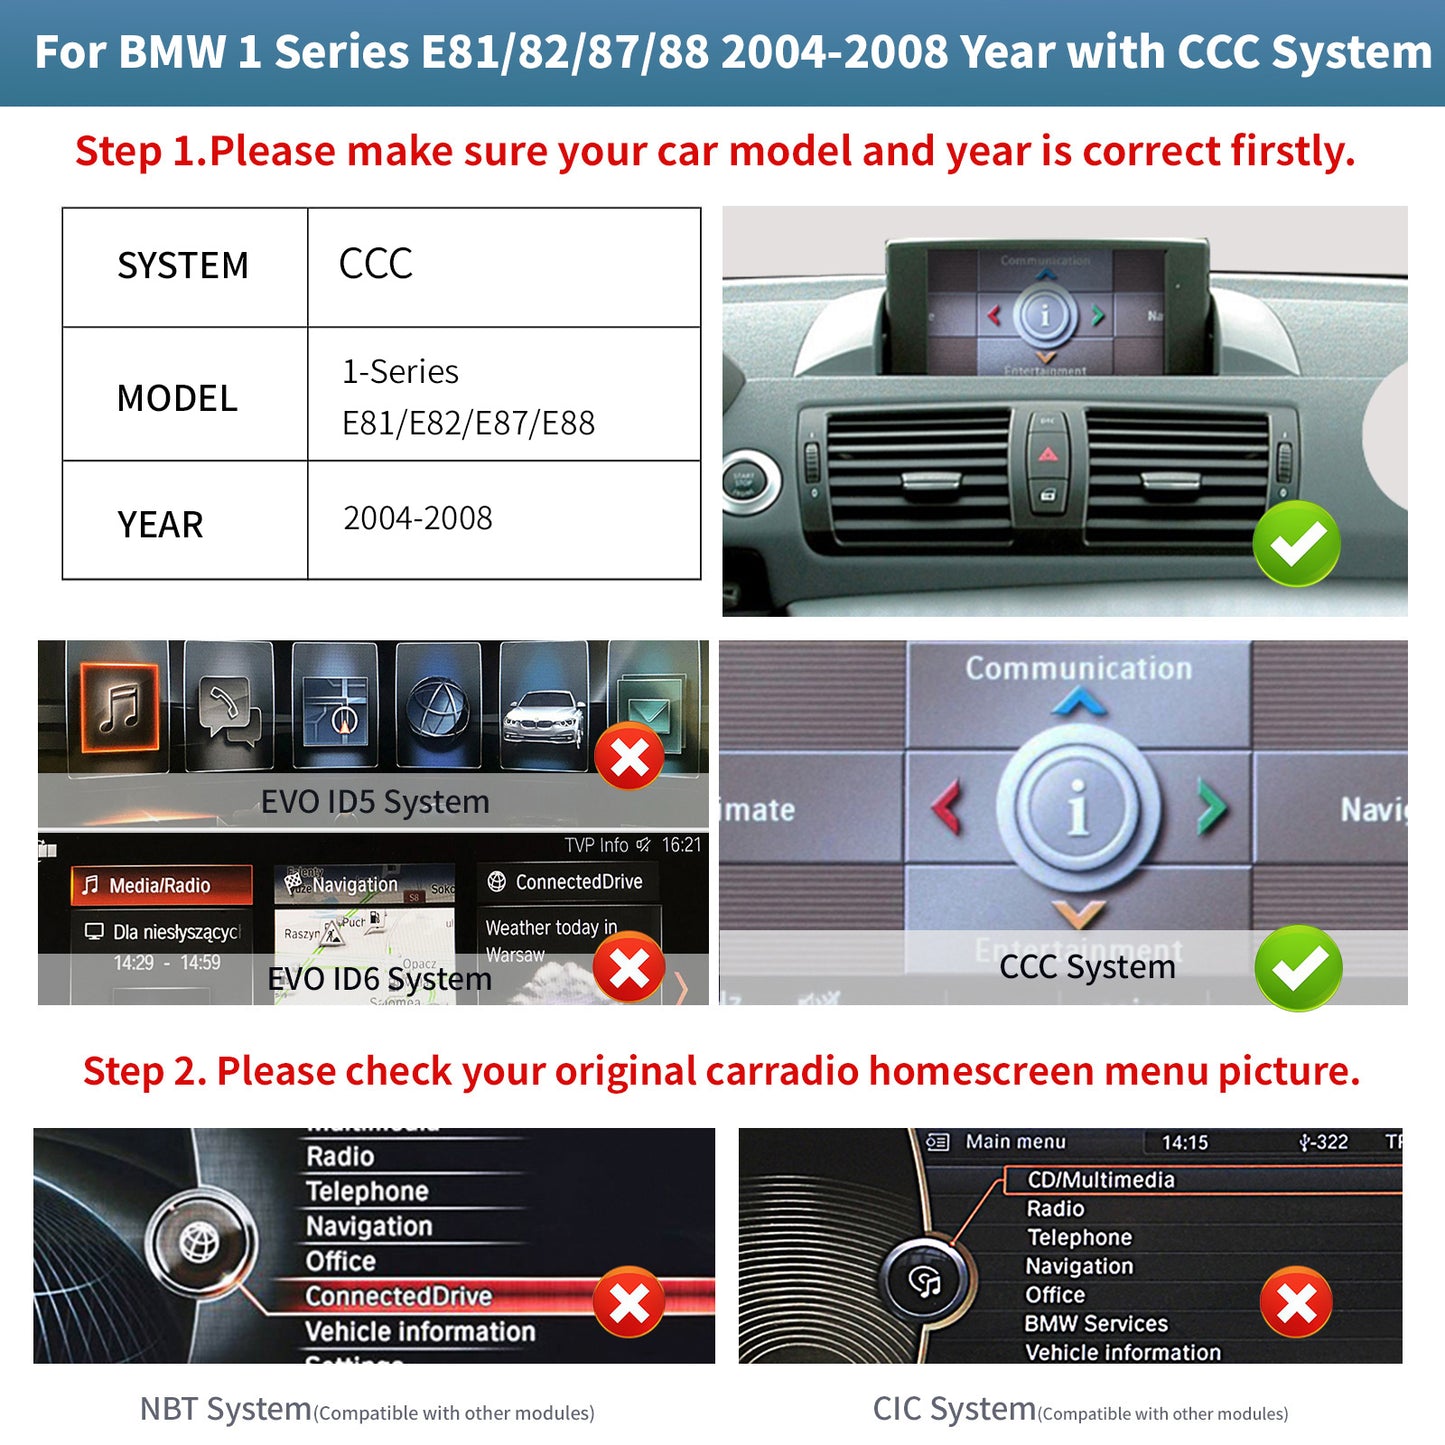 10.25" Linux screen for BMW 1 Series E81/F21 with CIC System